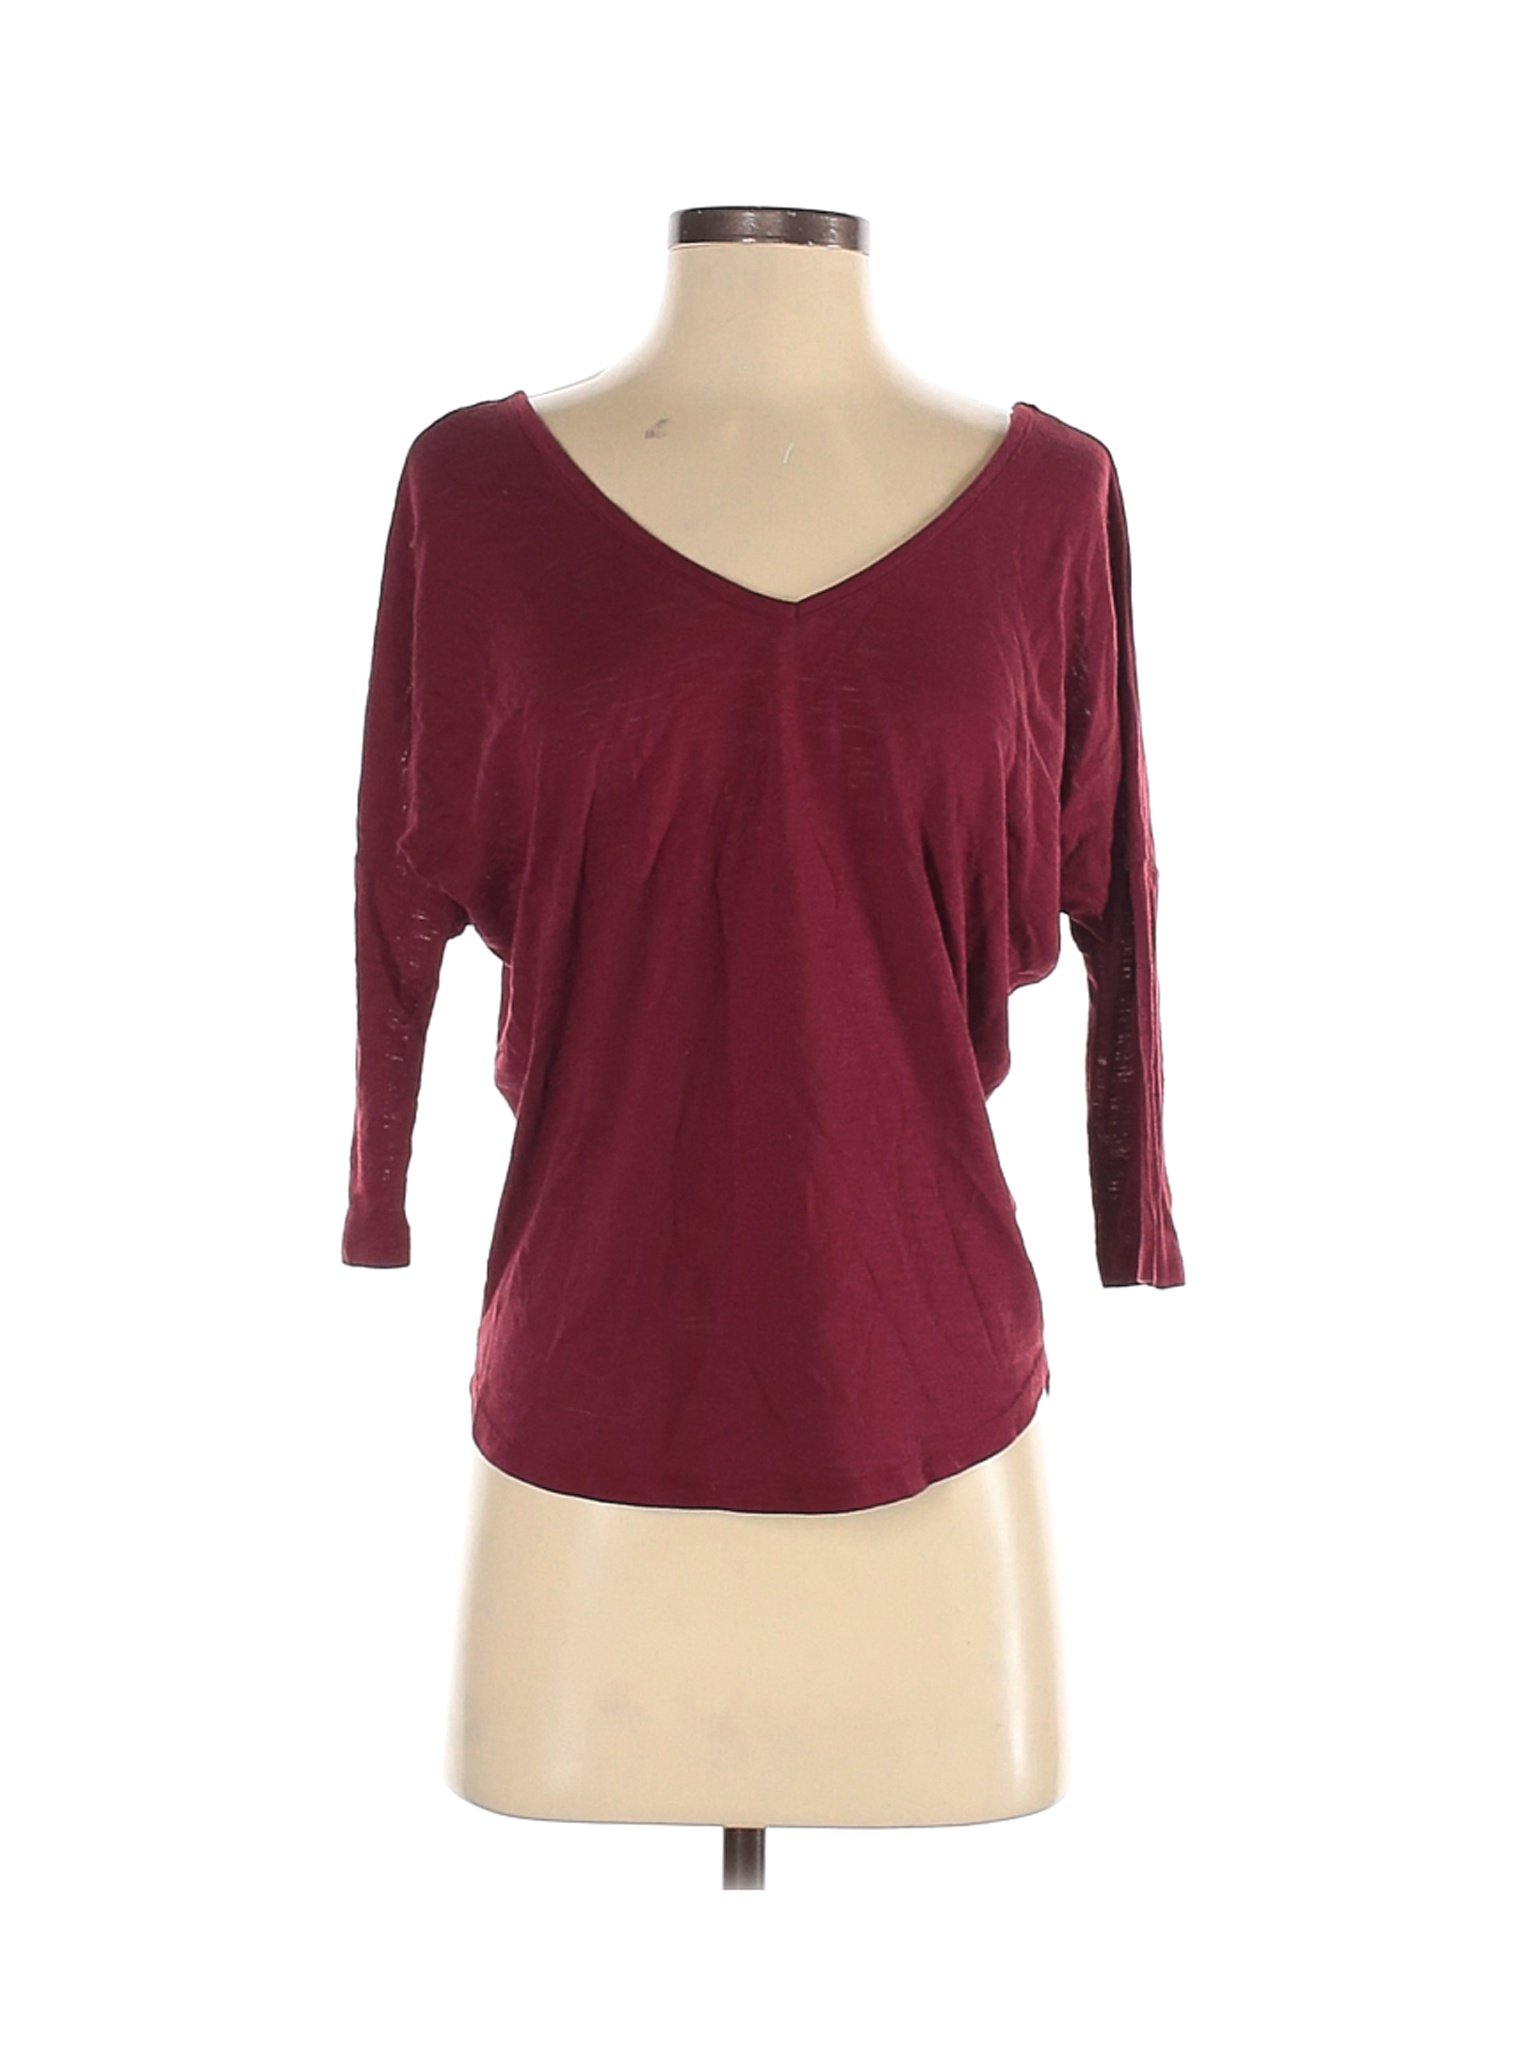 Maurices Women Red 3/4 Sleeve Top S | eBay